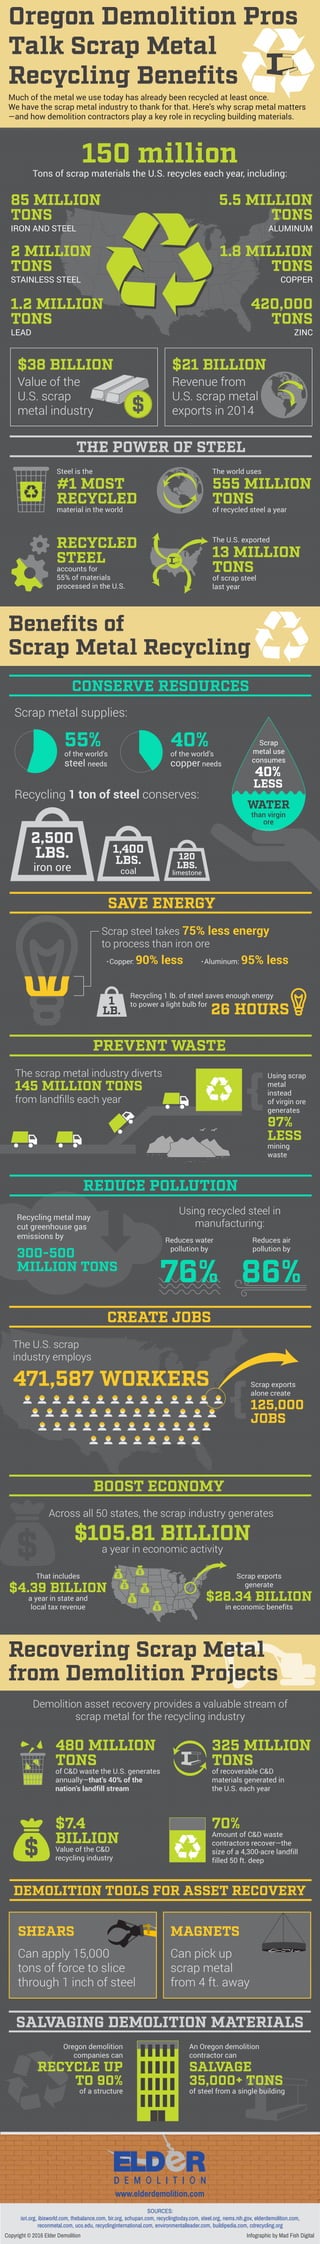 Much of the metal we use today has already been recycled at least once.
We have the scrap metal industry to thank for that. Here’s why scrap metal matters
—and how demolition contractors play a key role in recycling building materials.
150 million
Tons of scrap materials the U.S. recycles each year, including:
85 MILLION
TONS
IRON AND STEEL
5.5 MILLION
TONS
ALUMINUM
2 MILLION
TONS
STAINLESS STEEL
1.8 MILLION
TONS
COPPER
1.2 MILLION
TONS
LEAD
420,000
TONS
ZINC
$38 BILLION
THE POWER OF STEEL
CONSERVE RESOURCES
Value of the
U.S. scrap
metal industry
$21 BILLION
Revenue from
U.S. scrap metal
exports in 2014$
Steel is the
#1 MOST
RECYCLED
material in the world
The world uses
555 MILLION
TONS
of recycled steel a year
RECYCLED
STEEL
accounts for
55% of materials
processed in the U.S.
The U.S. exported
13 MILLION
TONS
of scrap steel
last year
SAVE ENERGY
Scrap metal supplies:
55%
of the world’s
steel needs
40%
of the world’s
copper needs
Recycling 1 ton of steel conserves:
120
LBS.
limestone
1,400
LBS.
coal
2,500
LBS.
iron ore
WATER
than virgin
ore
Scrap
metal use
consumes
40%
LESS
REDUCE POLLUTION
Scrap steel takes 75% less energy
to process than iron ore
Recycling 1 lb. of steel saves enough energy
to power a light bulb for
PREVENT WASTE
The scrap metal industry diverts
145 MILLION TONS
from landﬁlls each year
Using scrap
metal
instead
of virgin ore
generates
97%
LESS
mining
waste
{
CREATE JOBS
Recycling metal may
cut greenhouse gas
emissions by
Using recycled steel in
manufacturing:
Reduces water
pollution by
300-500
MILLION TONS
76%
Reduces air
pollution by
86%
1
LB. 26 HOURS
Copper: 90% less Aluminum: 95% less
The U.S. scrap
industry employs
Scrap exports
alone create
125,000
JOBS
471,587 WORKERS
BOOST ECONOMY
Demolition asset recovery provides a valuable stream of
scrap metal for the recycling industry
Beneﬁts of
Scrap Metal Recycling
$105.81 BILLION
a year in economic activity
That includes
$4.39 BILLION
a year in state and
local tax revenue
Across all 50 states, the scrap industry generates
Scrap exports
generate
$28.34 BILLION
in economic benefits
{
DEMOLITION TOOLS FOR ASSET RECOVERY
Recovering Scrap Metal
from Demolition Projects
Oregon Demolition Pros
Talk Scrap Metal
Recycling Beneﬁts
Can apply 15,000
tons of force to slice
through 1 inch of steel
480 MILLION
TONS
of C&D waste the U.S. generates
annually—that’s 40% of the
nation’s landfill stream
325 MILLION
TONS
of recoverable C&D
materials generated in
the U.S. each year
$7.4
BILLION
Value of the C&D
recycling industry
70%
Amount of C&D waste
contractors recover—the
size of a 4,300-acre landfill
filled 50 ft. deep
Oregon demolition
companies can
RECYCLE UP
TO 90%
of a structure
An Oregon demolition
contractor can
SALVAGE
35,000+ TONS
of steel from a single building
SHEARS
Can pick up
scrap metal
from 4 ft. away
MAGNETS
SALVAGING DEMOLITION MATERIALS
SOURCES:
isri.org, ibisworld.com, thebalance.com, bir.org, schupan.com, recyclingtoday.com, steel.org, nems.nih.gov, elderdemolition.com,
reconmetal.com, uco.edu, recyclinginternational.com, environmentalleader.com, buildipedia.com, cdrecycling.org
www.elderdemolition.com
Copyright © 2016 Elder Demolition Infographic by Mad Fish Digital
 